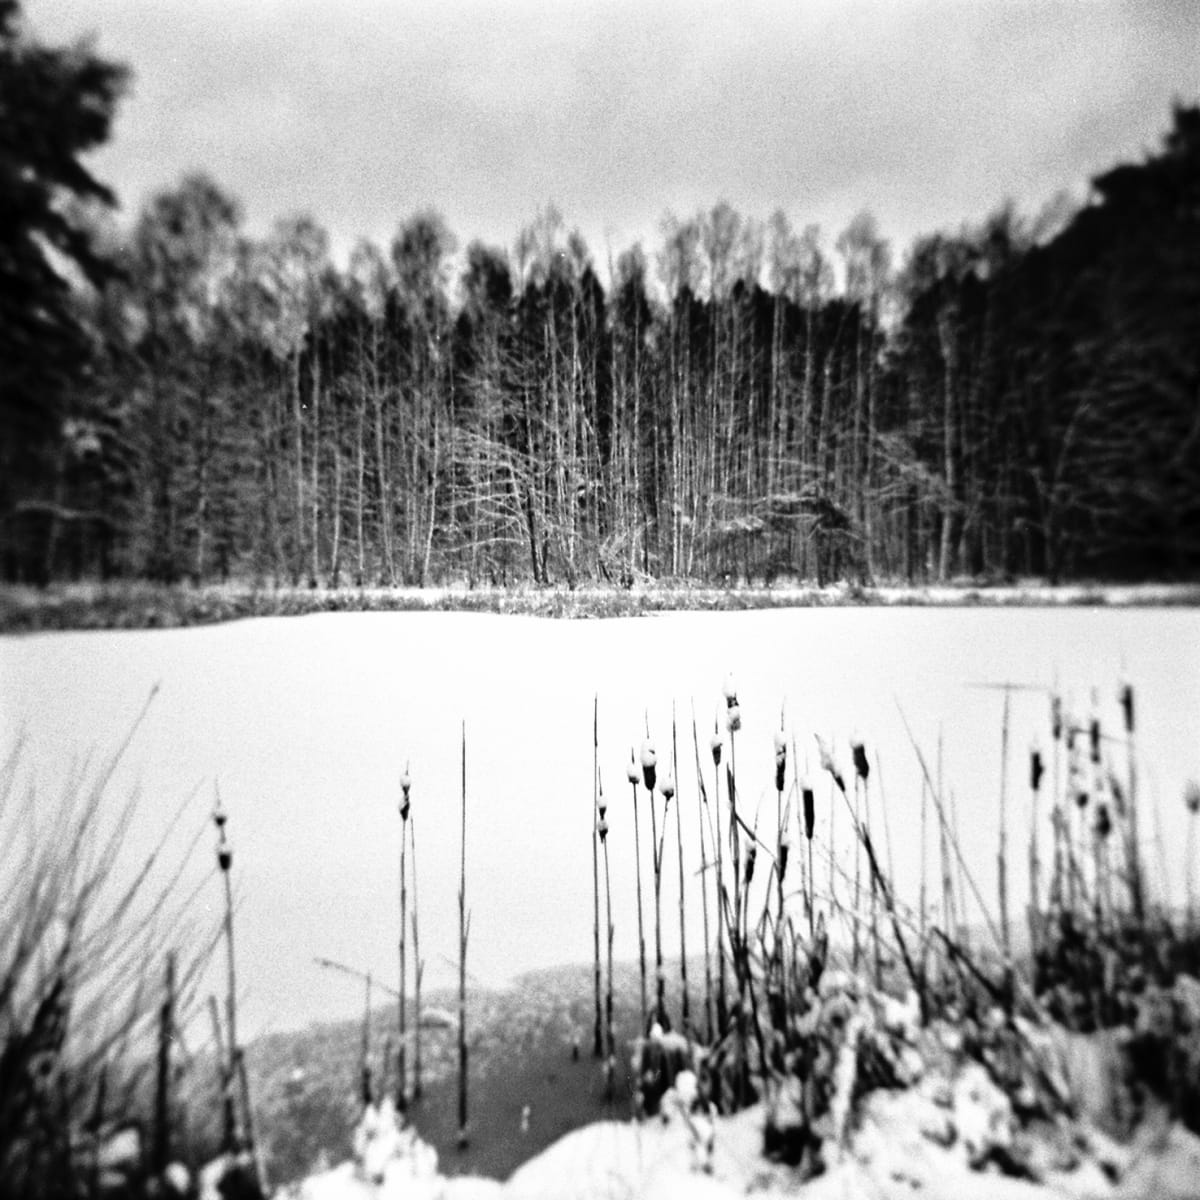 Winterday at the Pond by Rolf Florschuetz  Image: Analog on Film